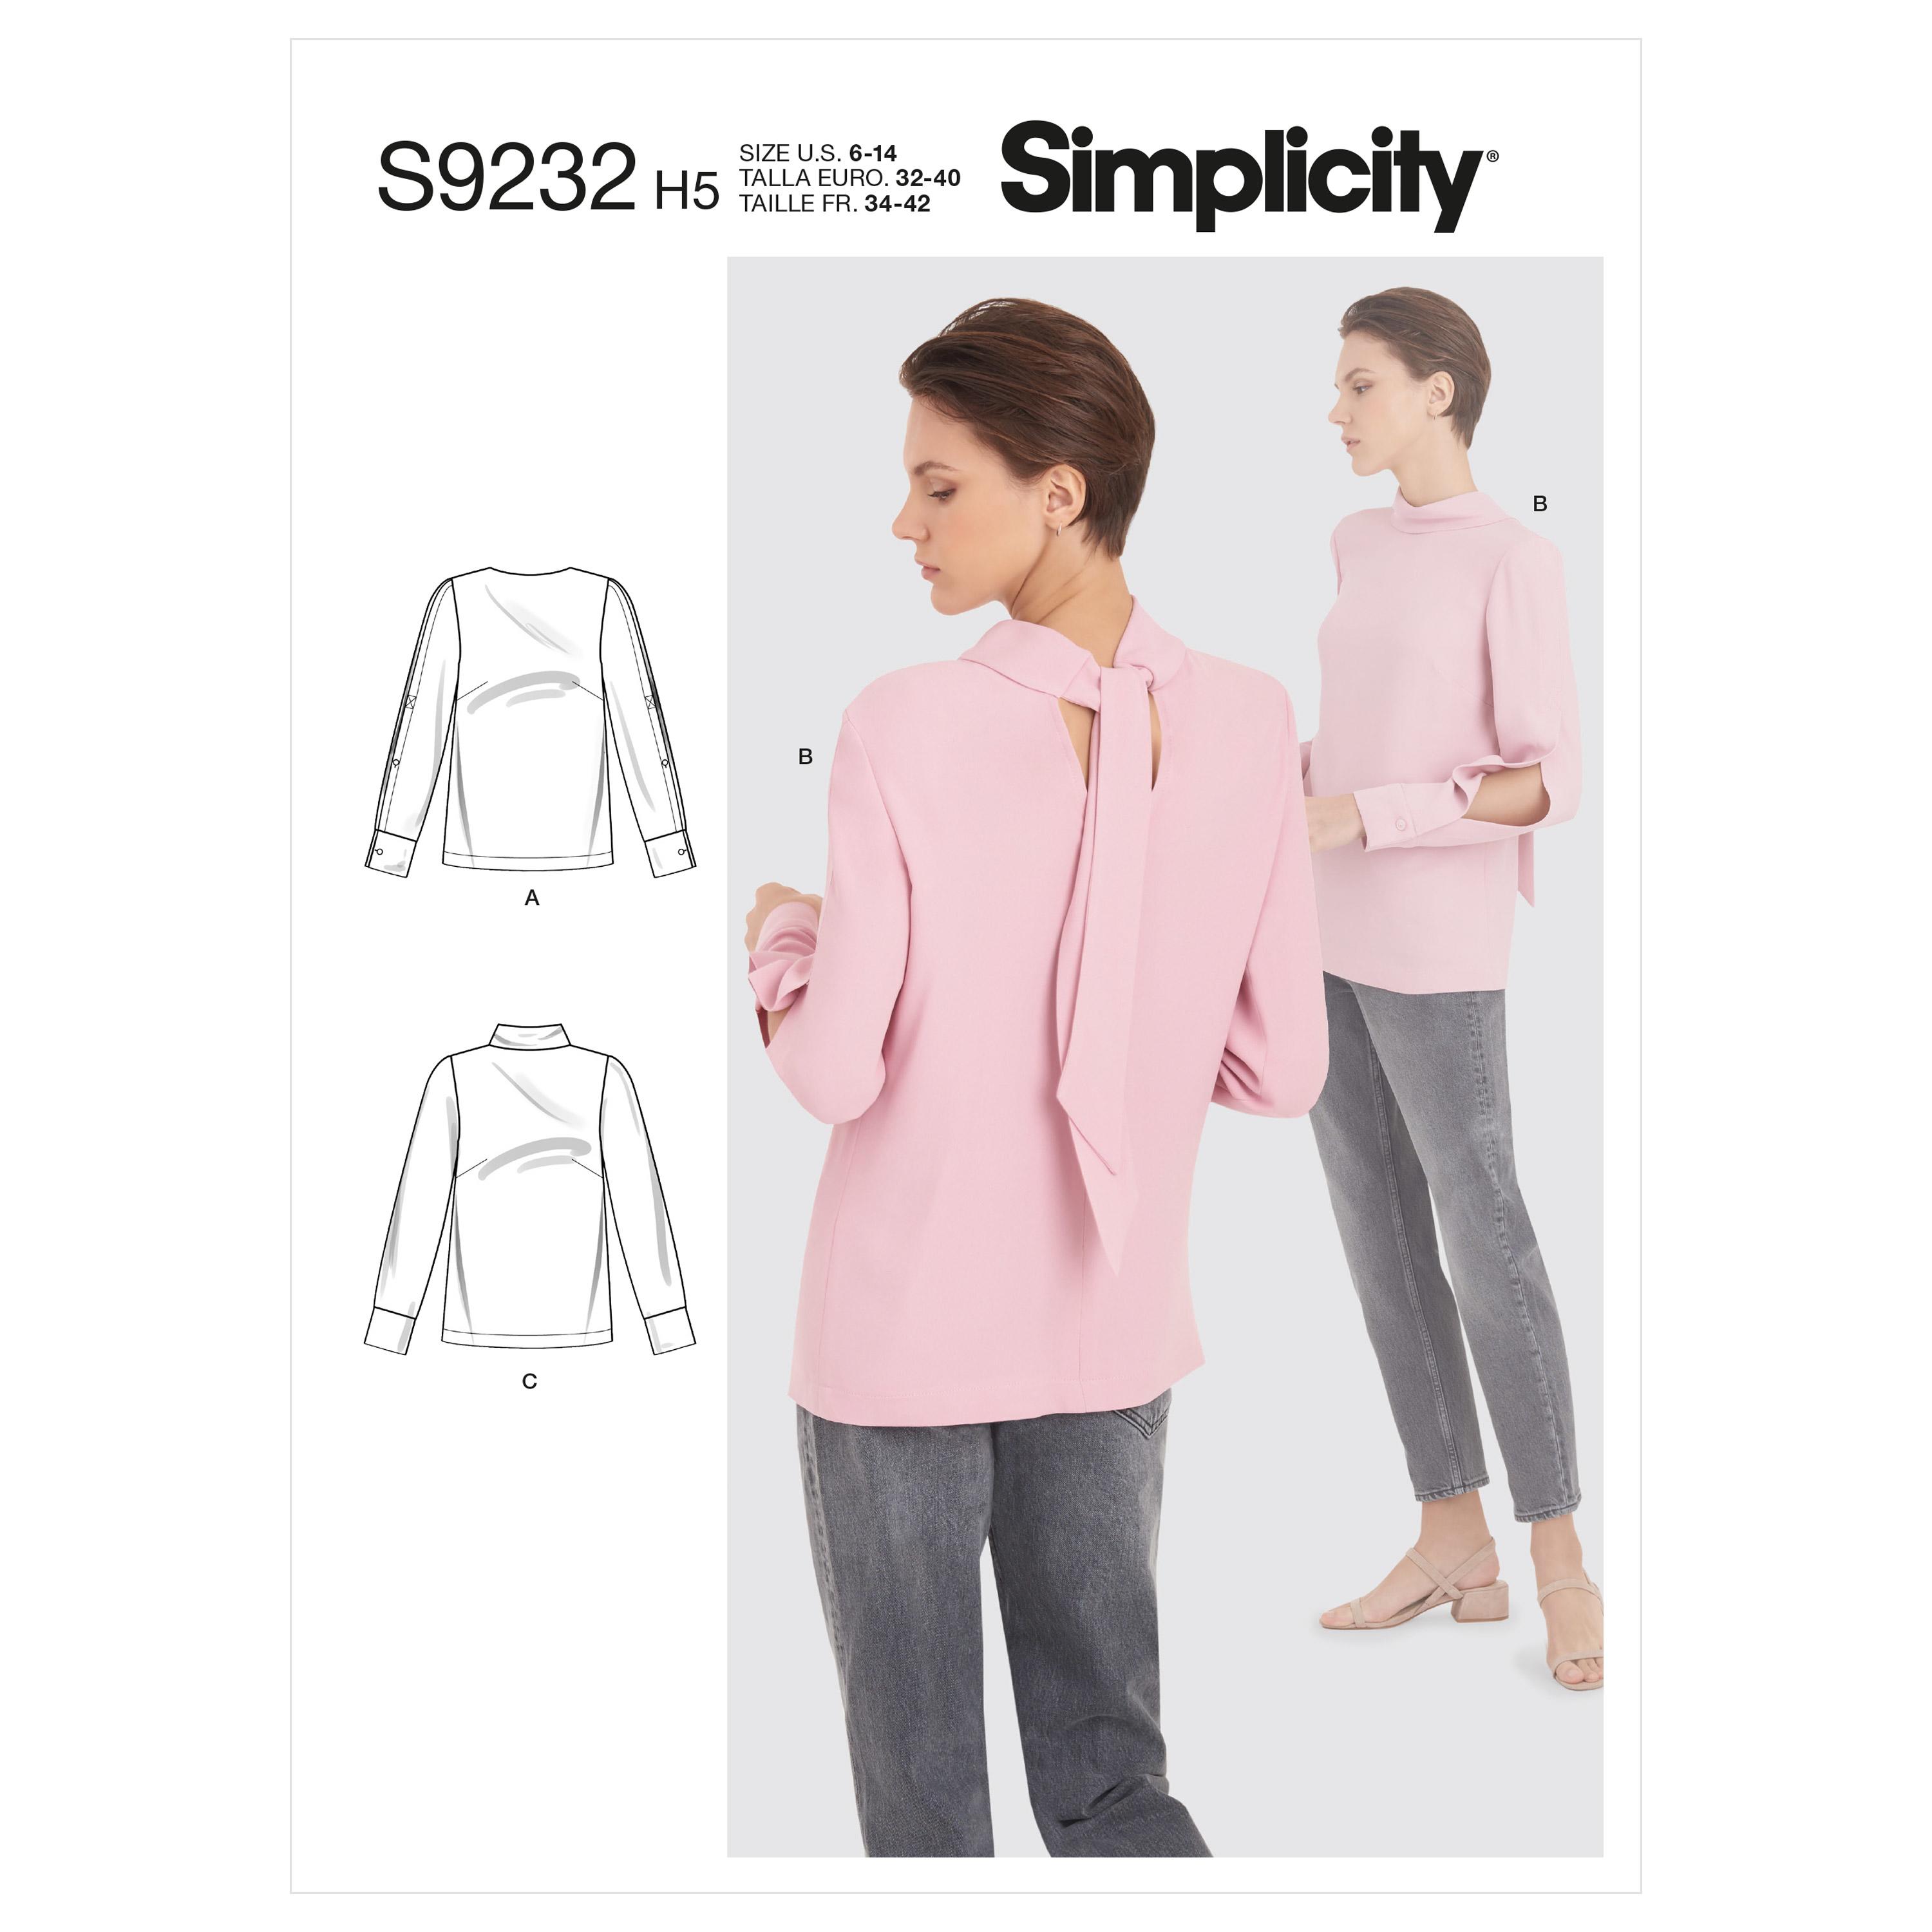 Simplicity Sewing Pattern S9232 Misses' Tops